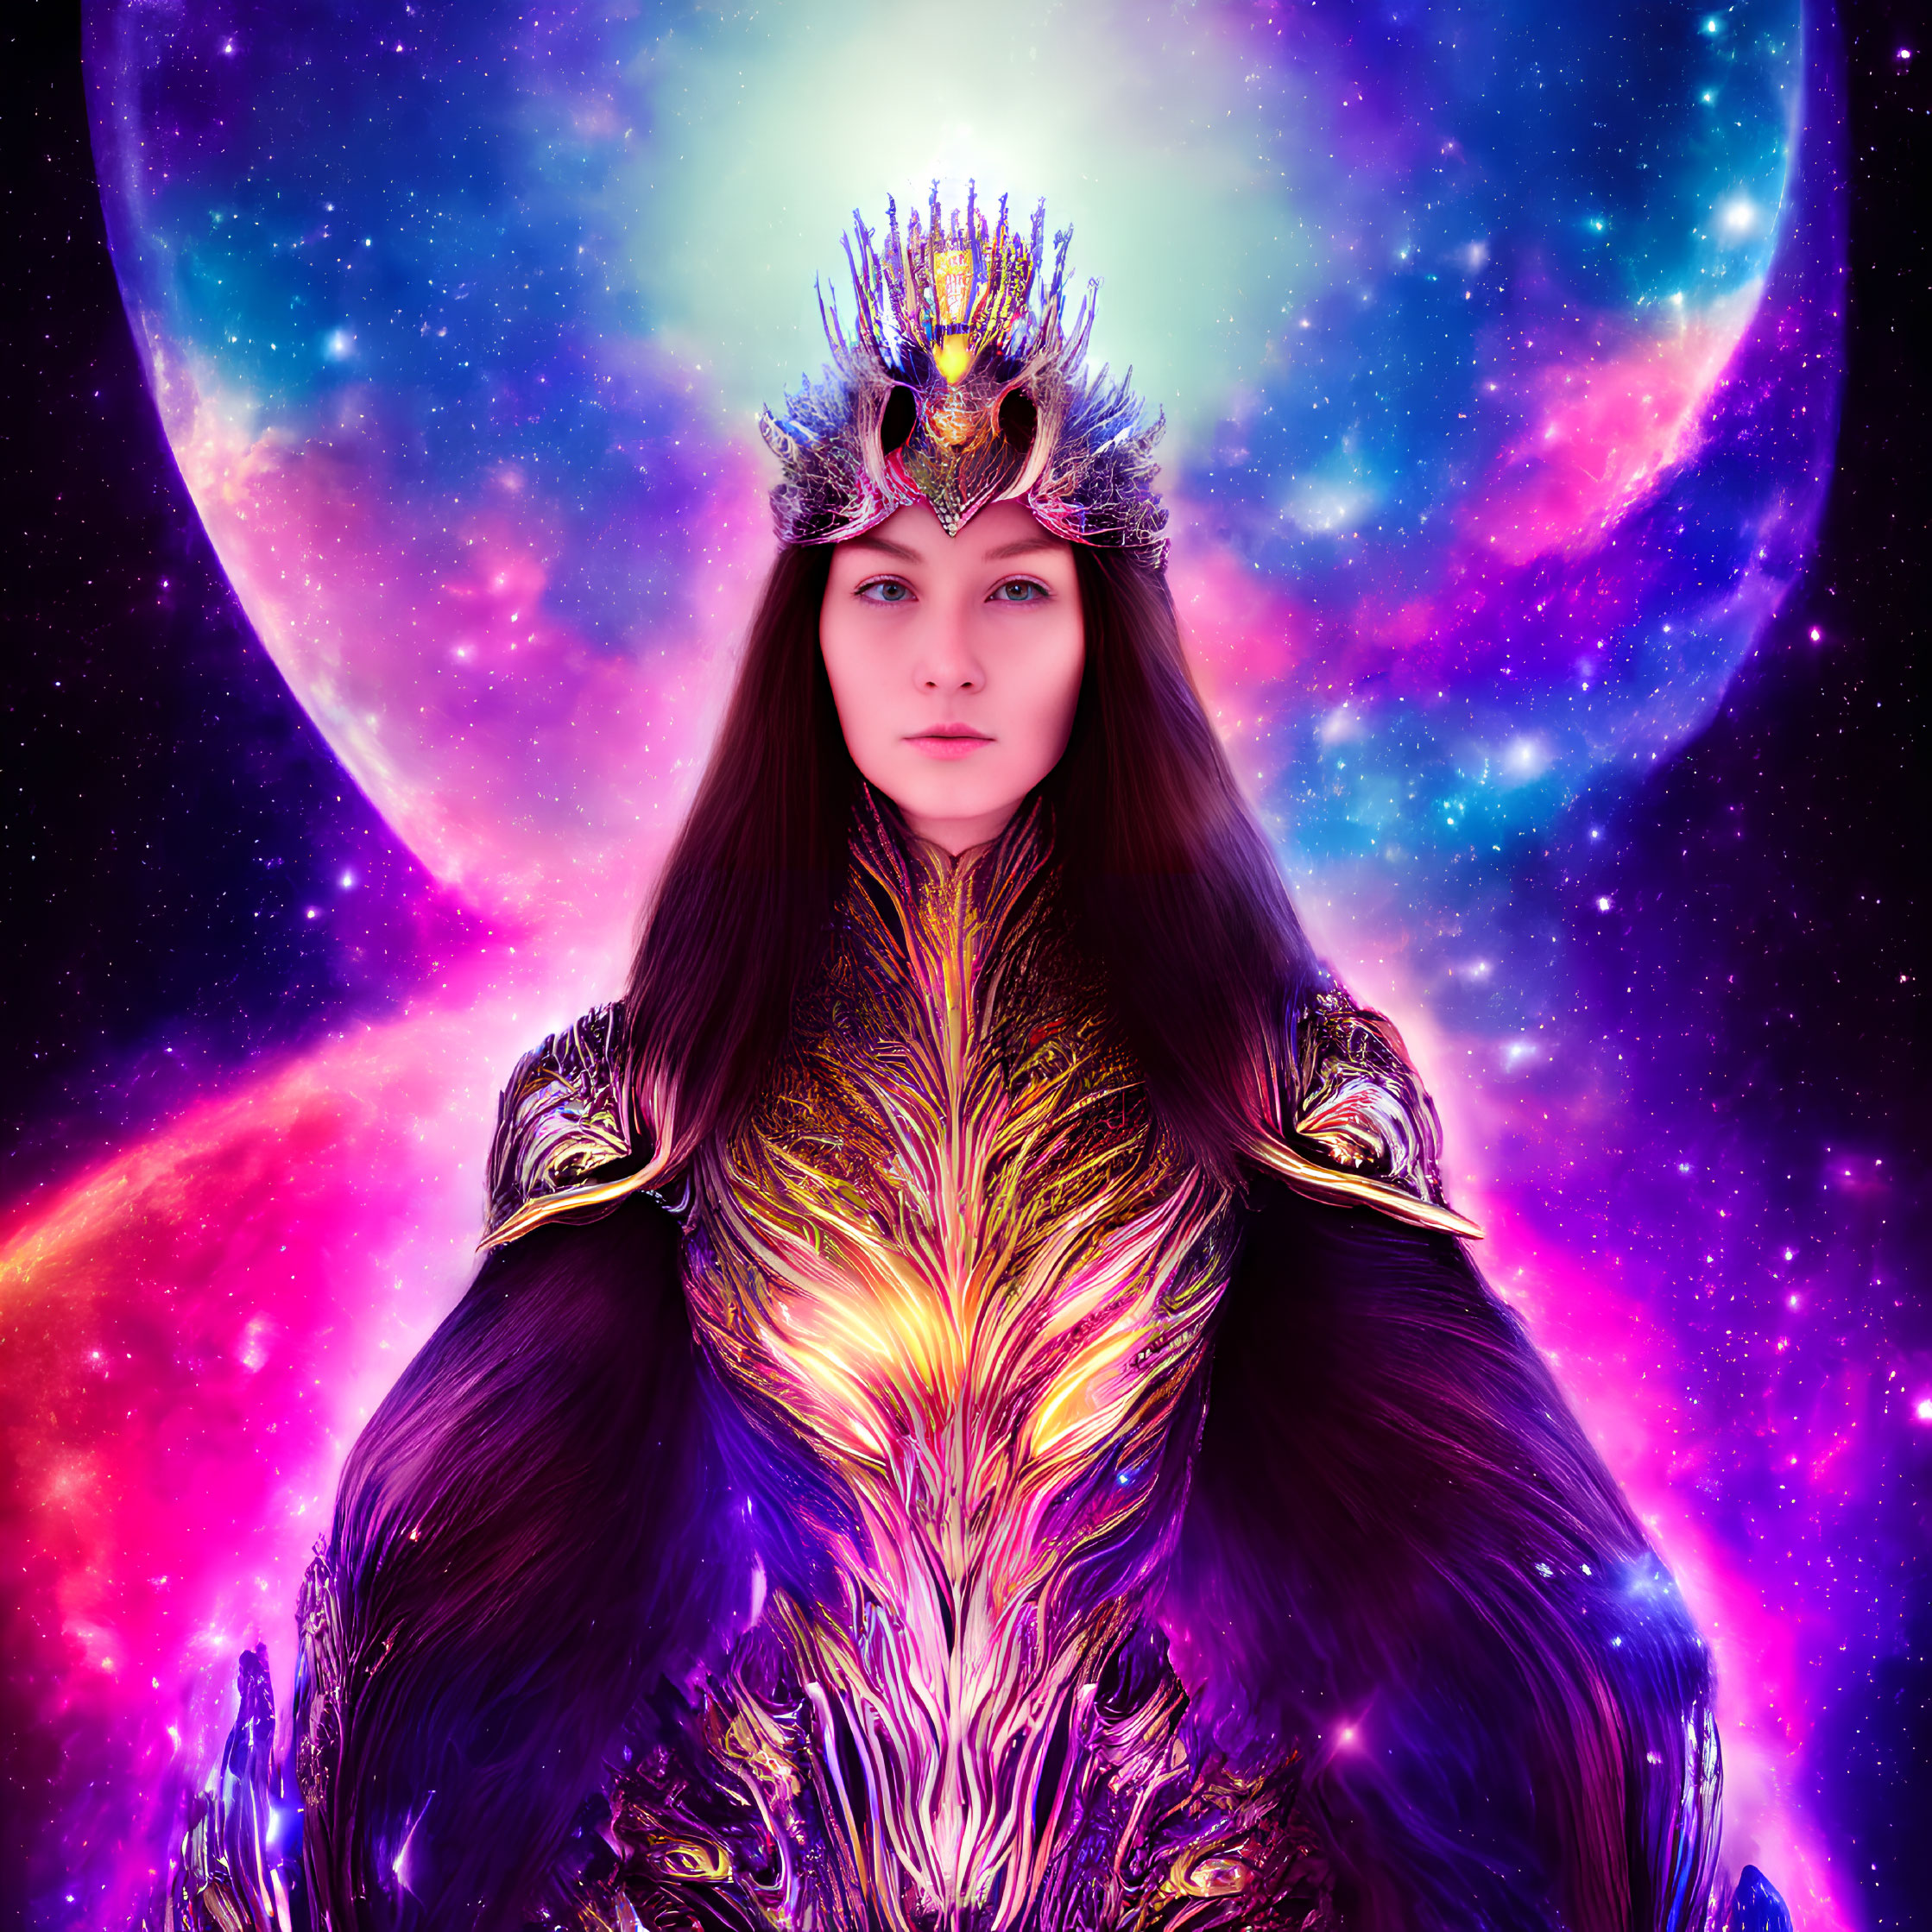 Regal woman with crown and cosmic background featuring moon and stars